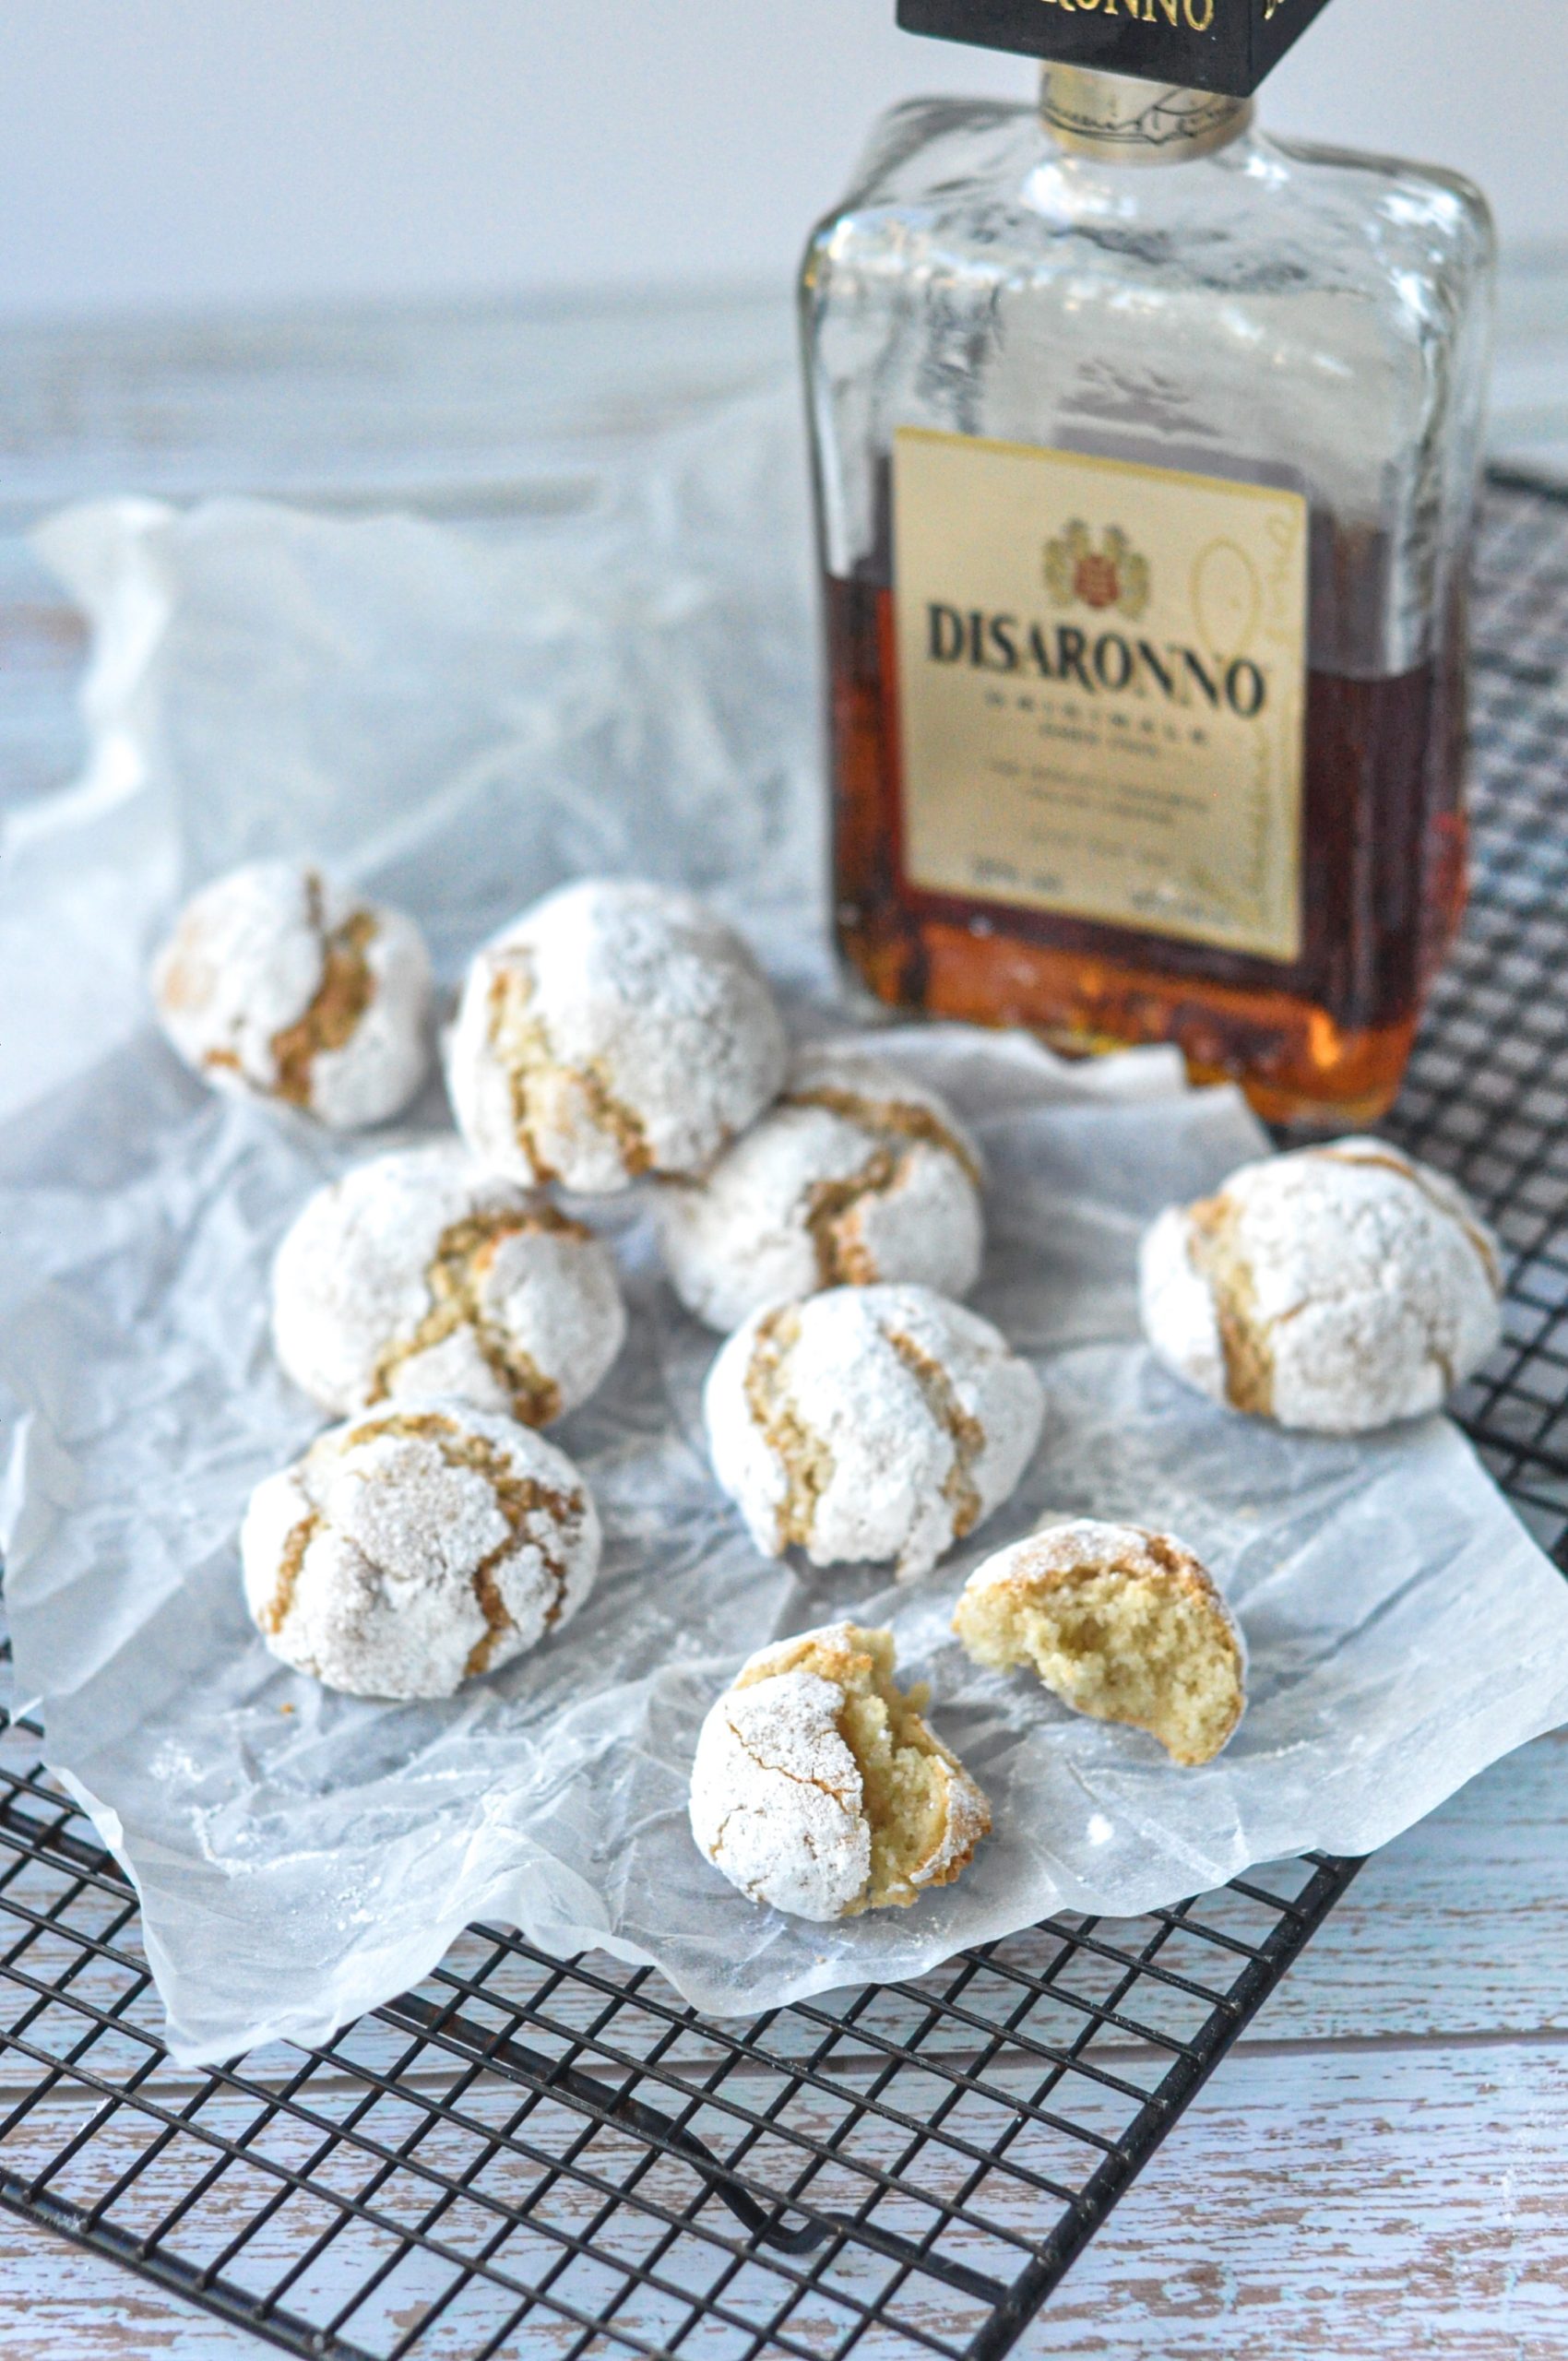 Amaretti Biscuits with bottle of Amaretto in the background